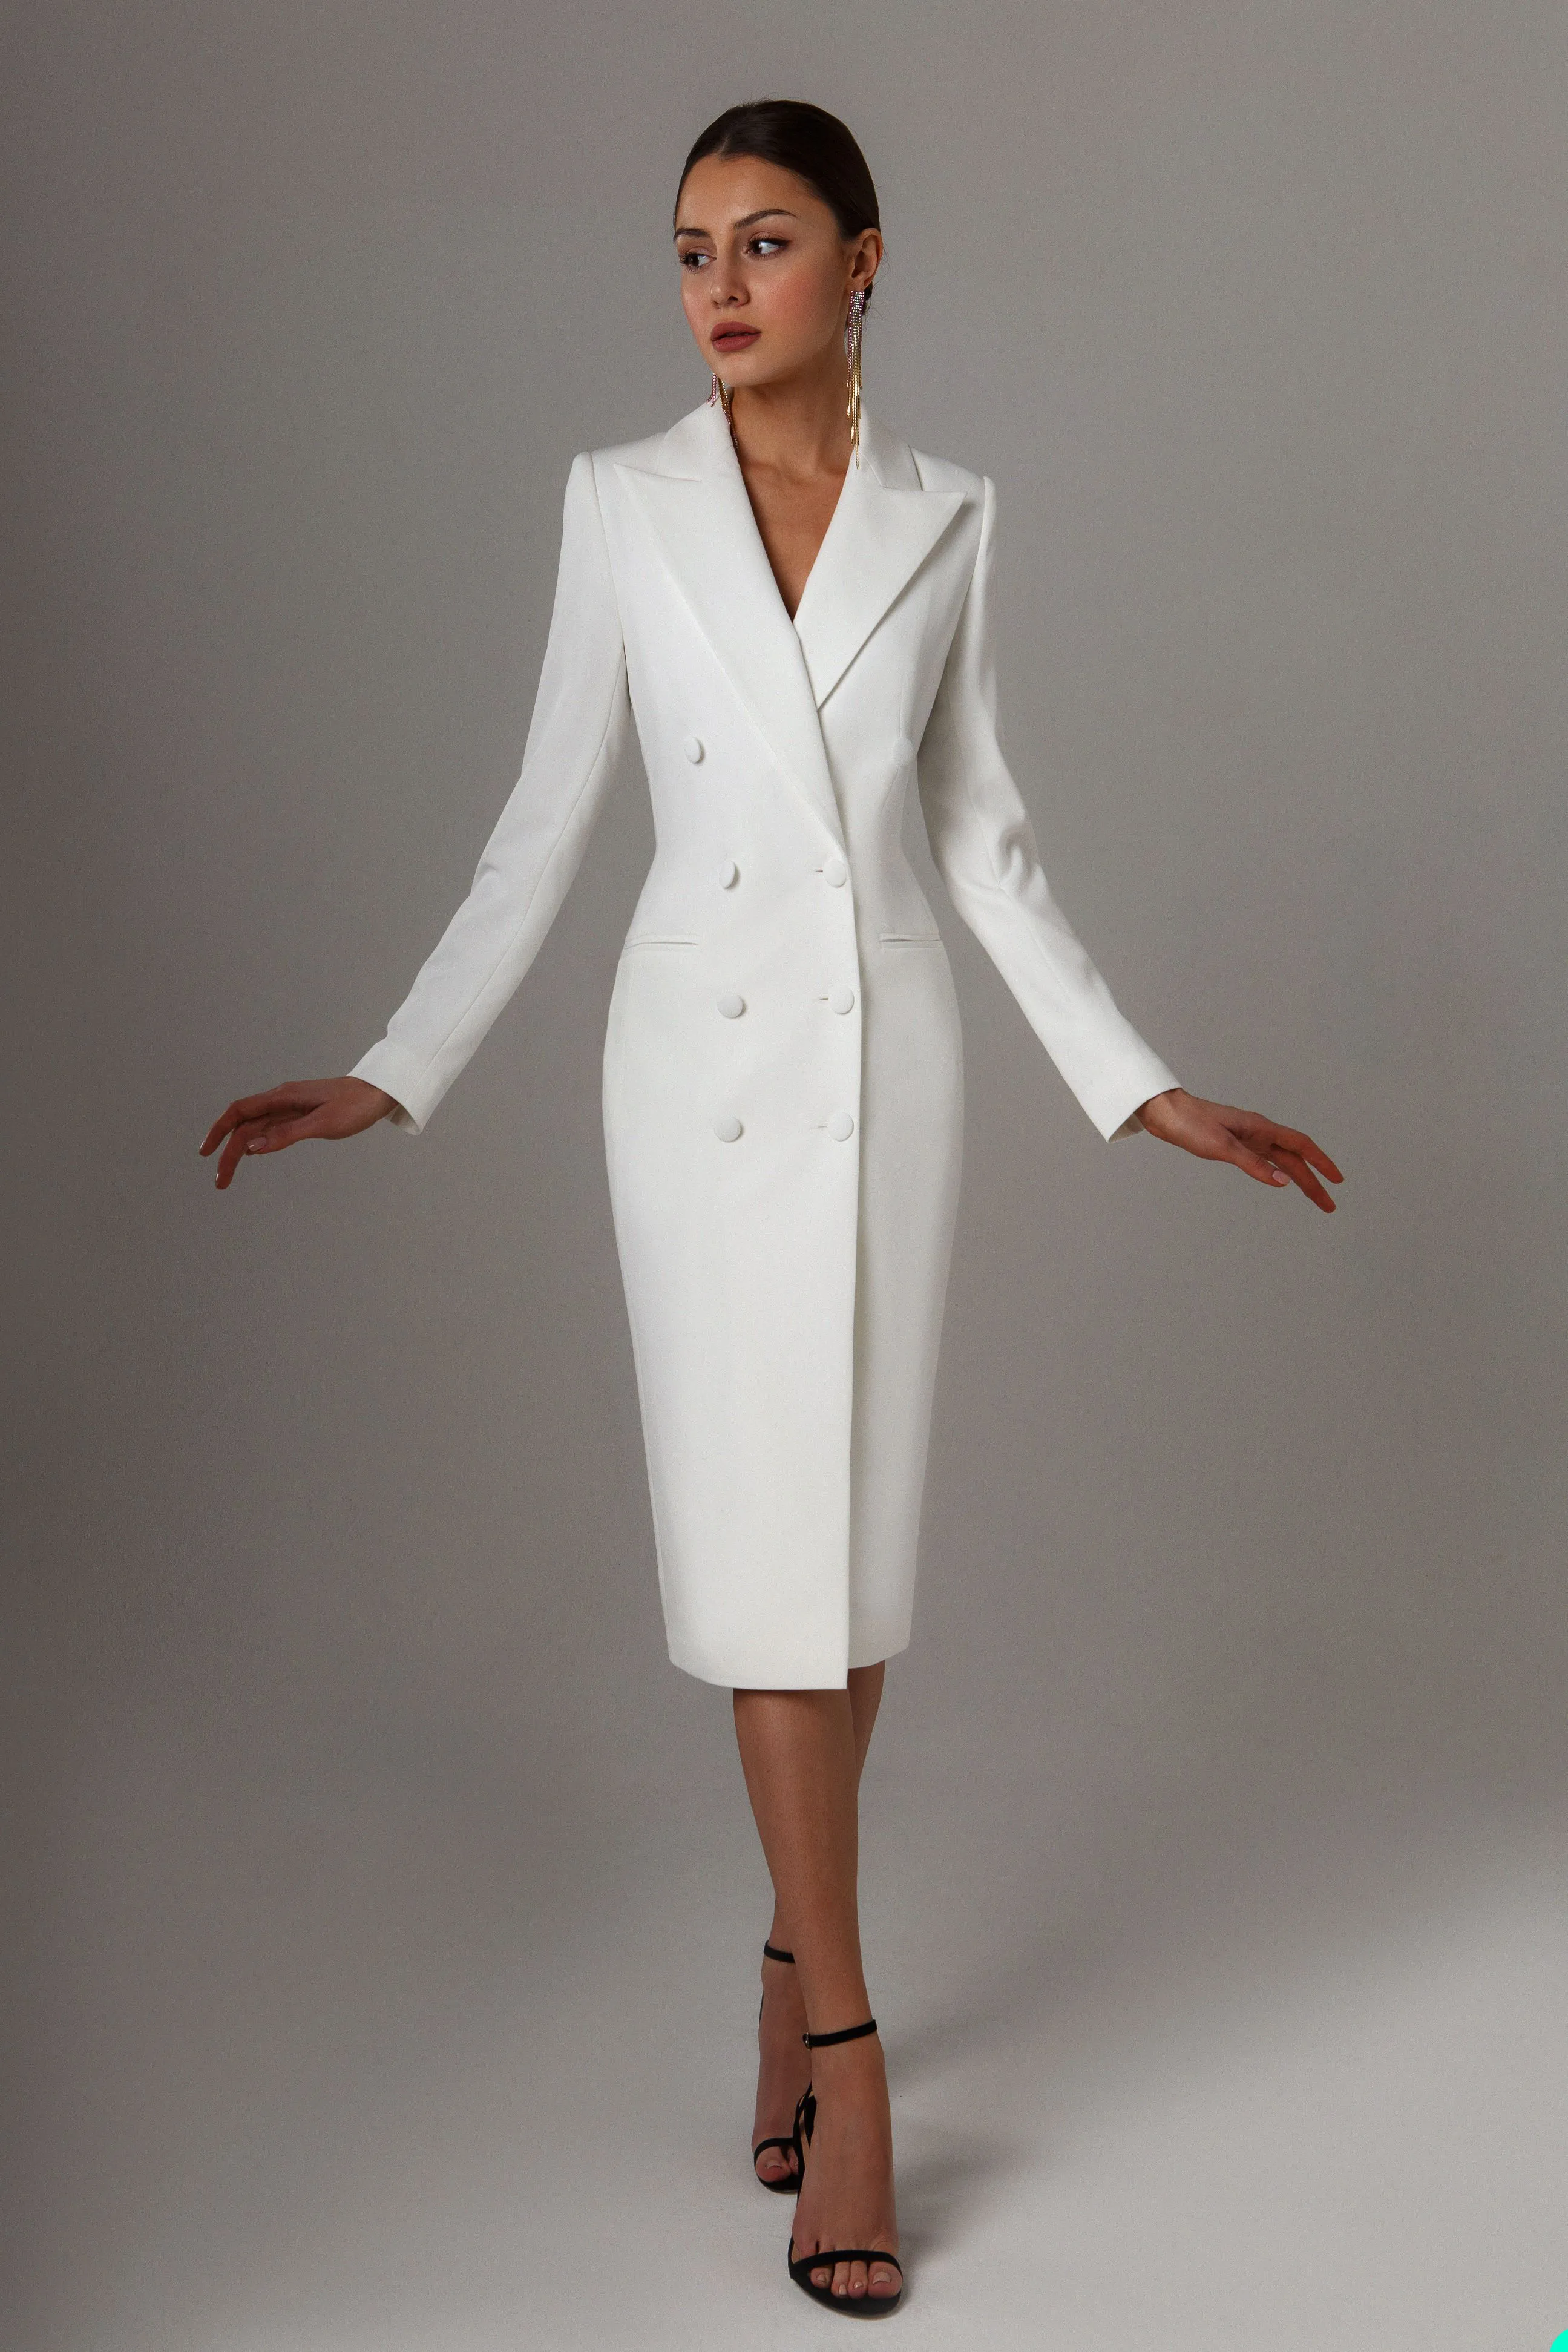 Autumn White Double Breasted Women outfit Long Jacket Suits Ladies Prom Evening Guest Formal Wear Custom Made